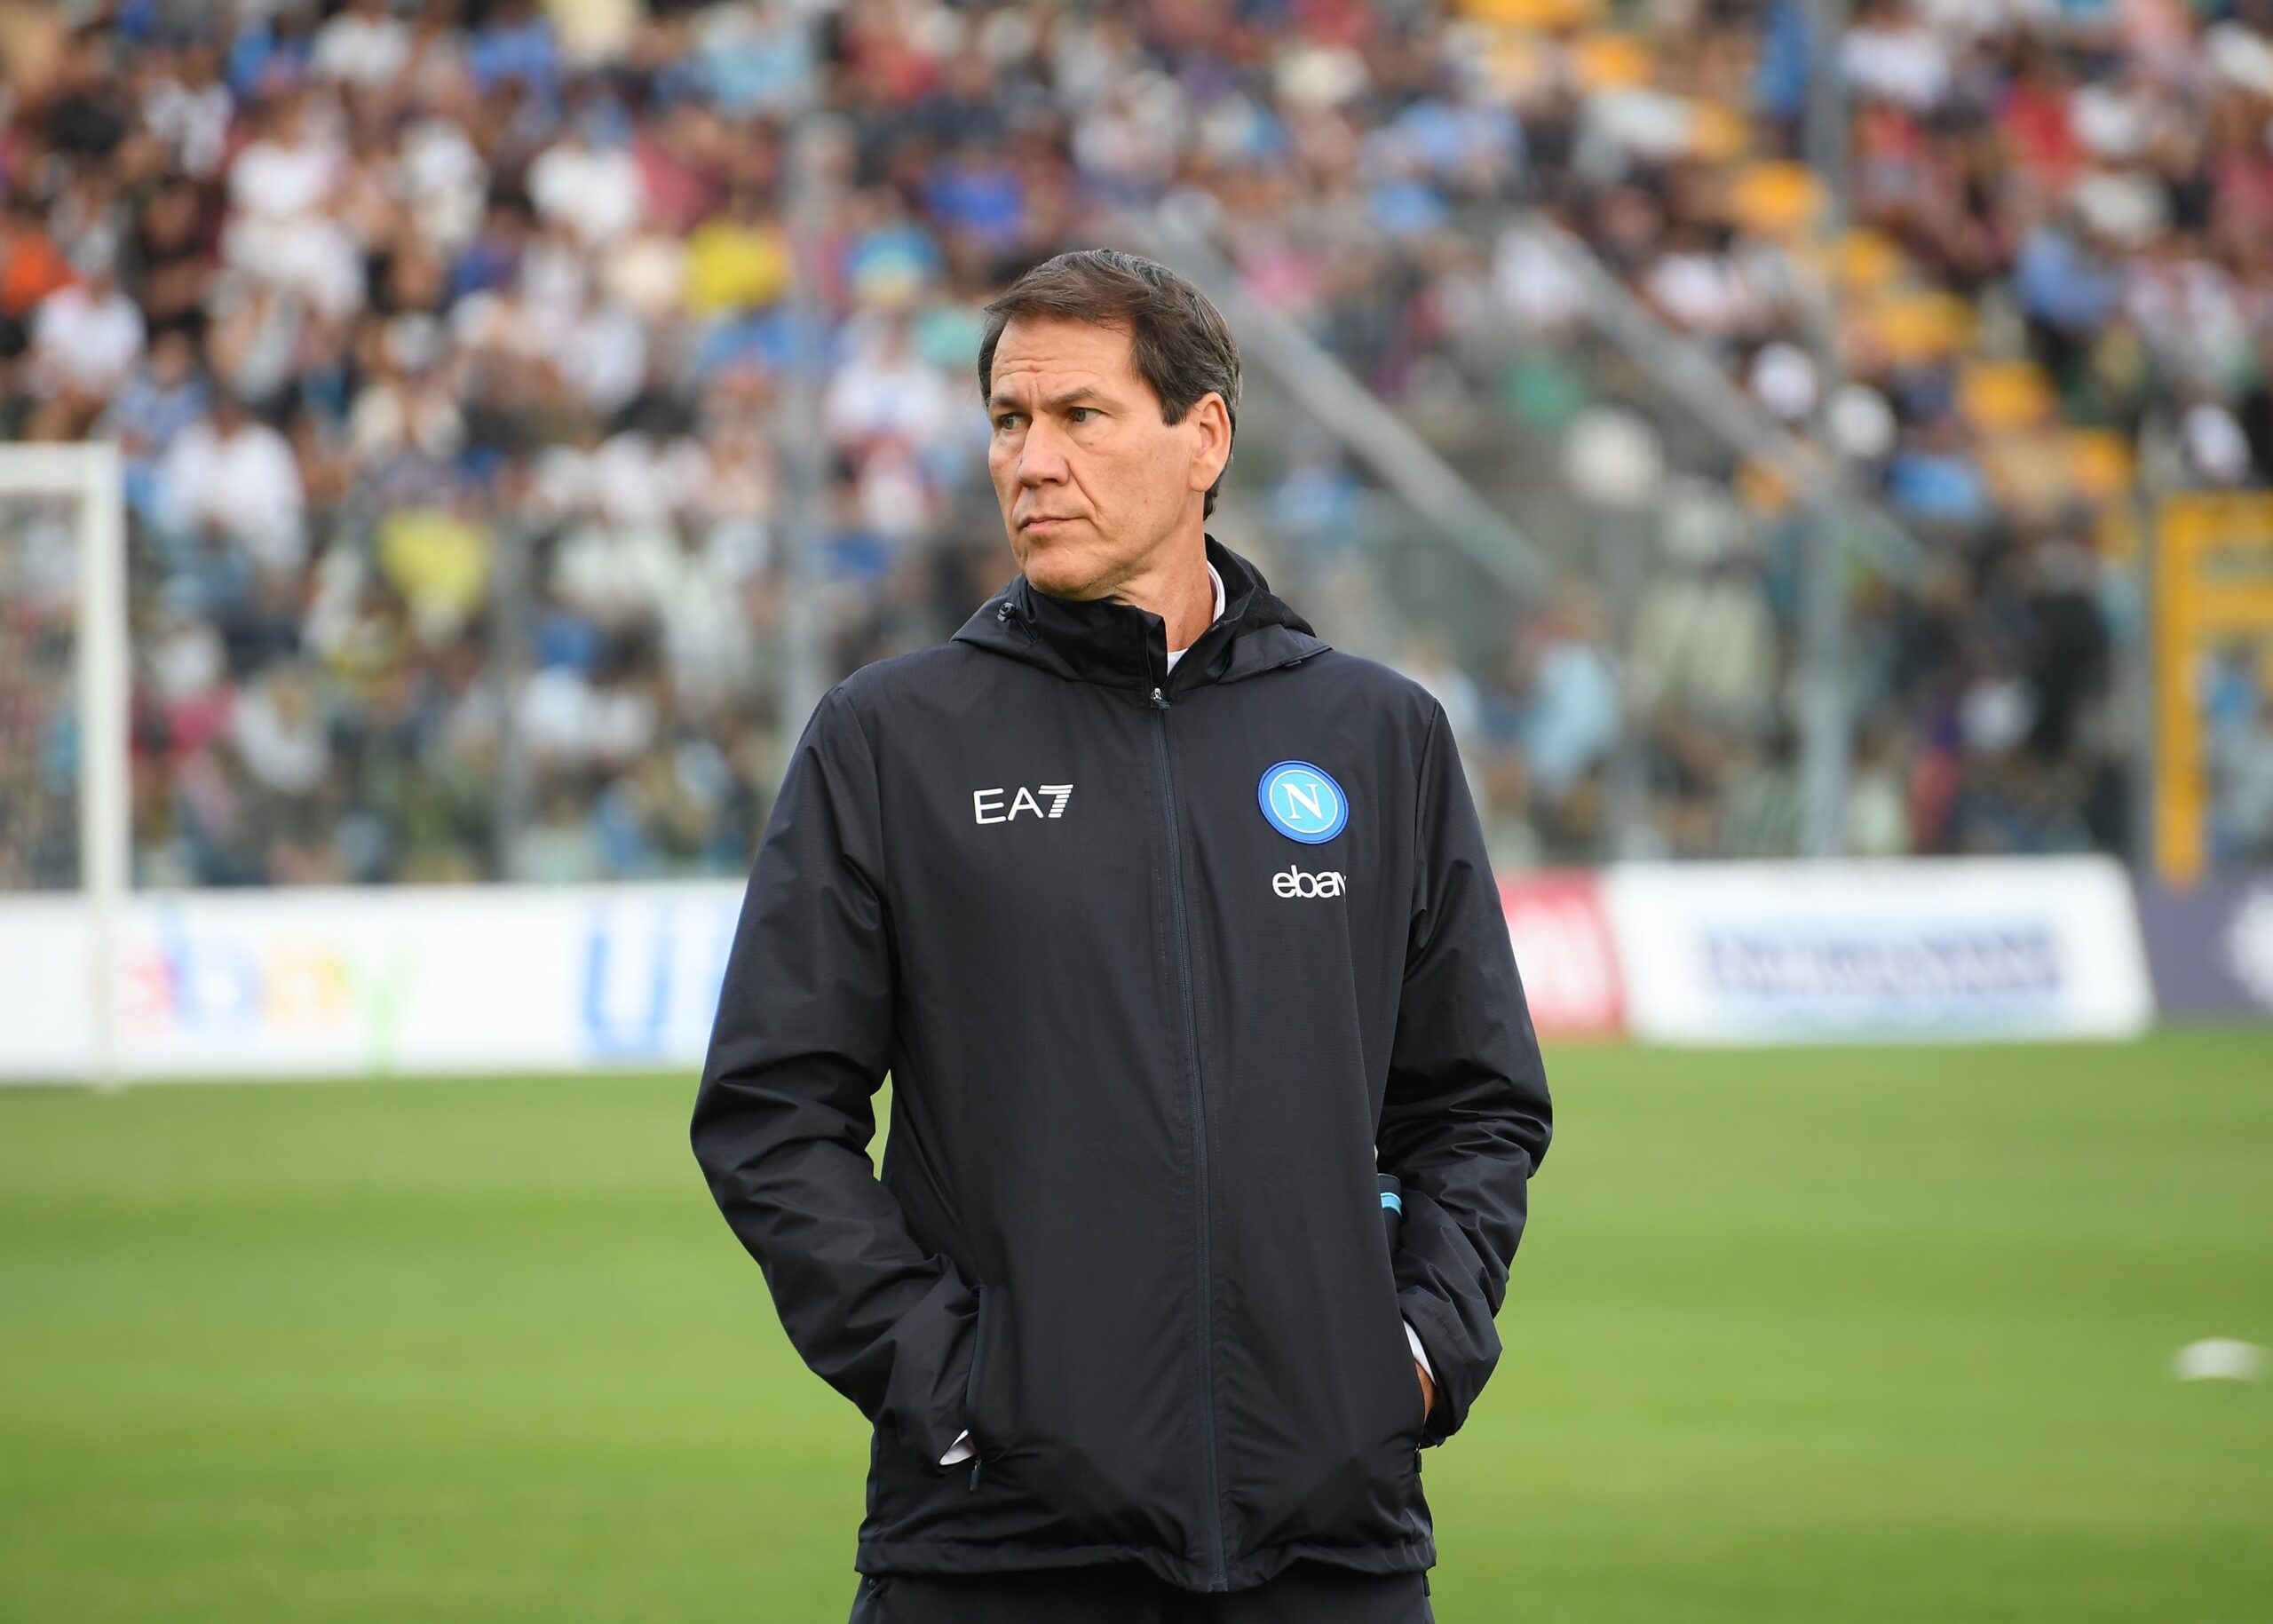 Napoli are in a pickle as Antonio Conte refused their offer to substitute for Rudi Garcia. They are leaning toward confirming Rudi Garcia.